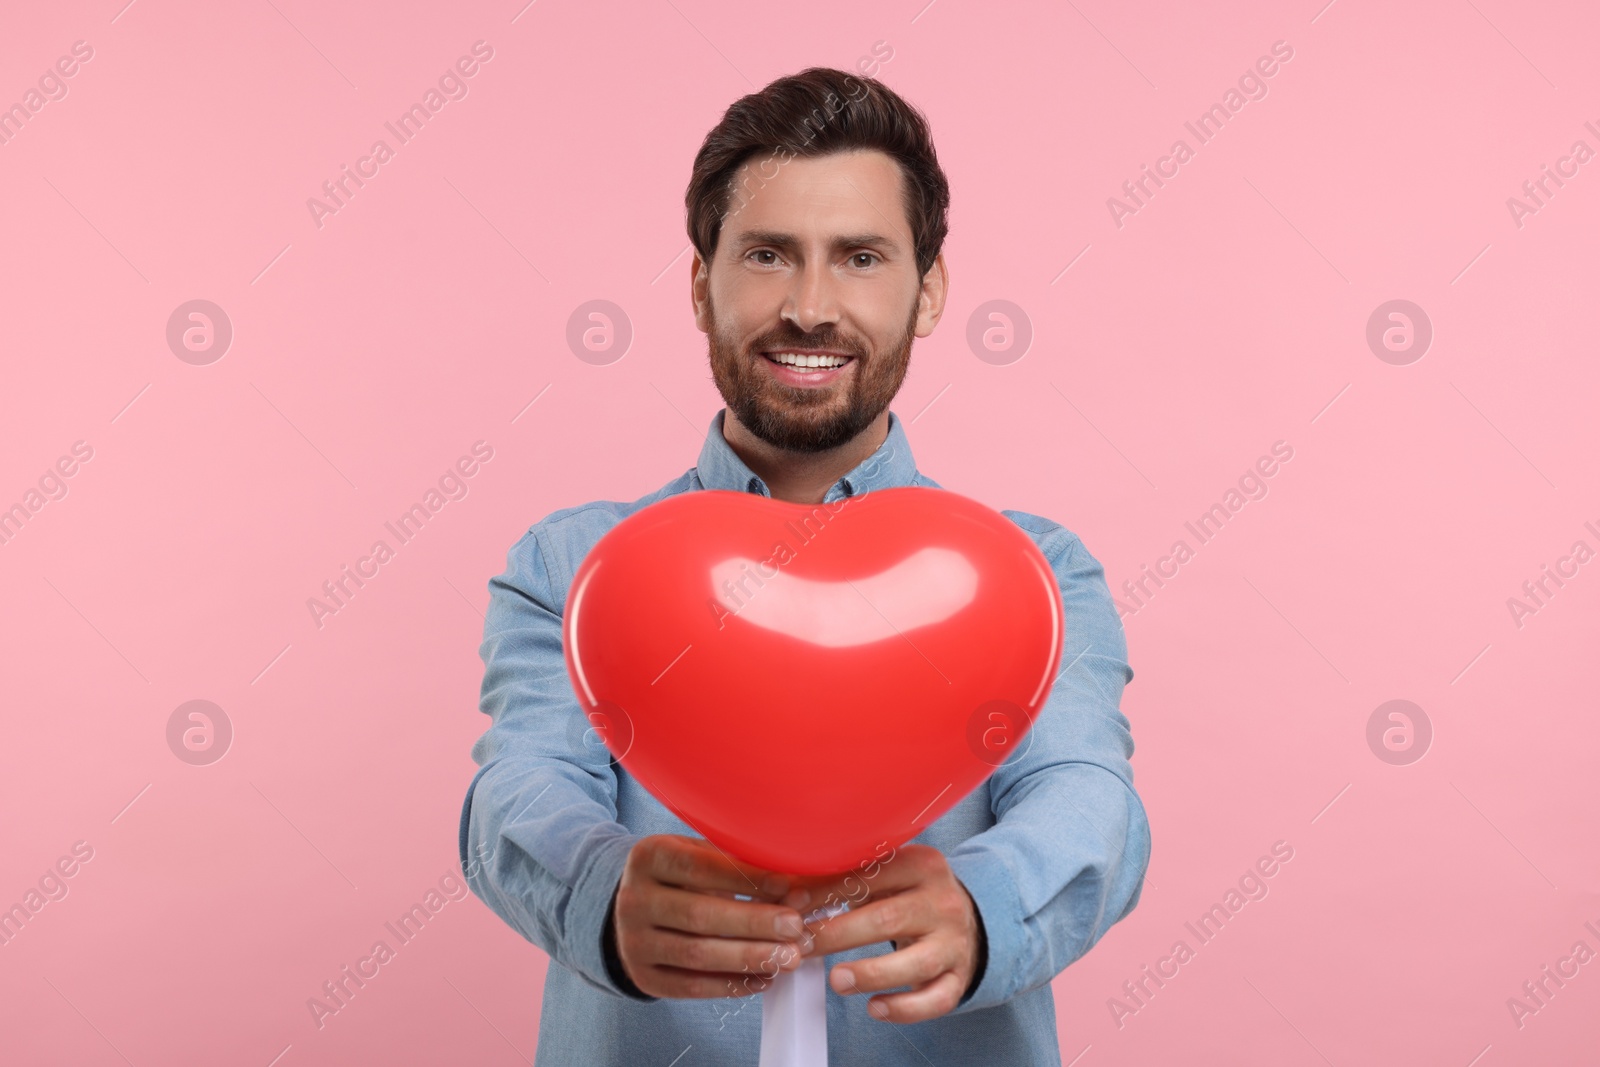 Photo of Happy man holding red heart shaped balloon on pink background